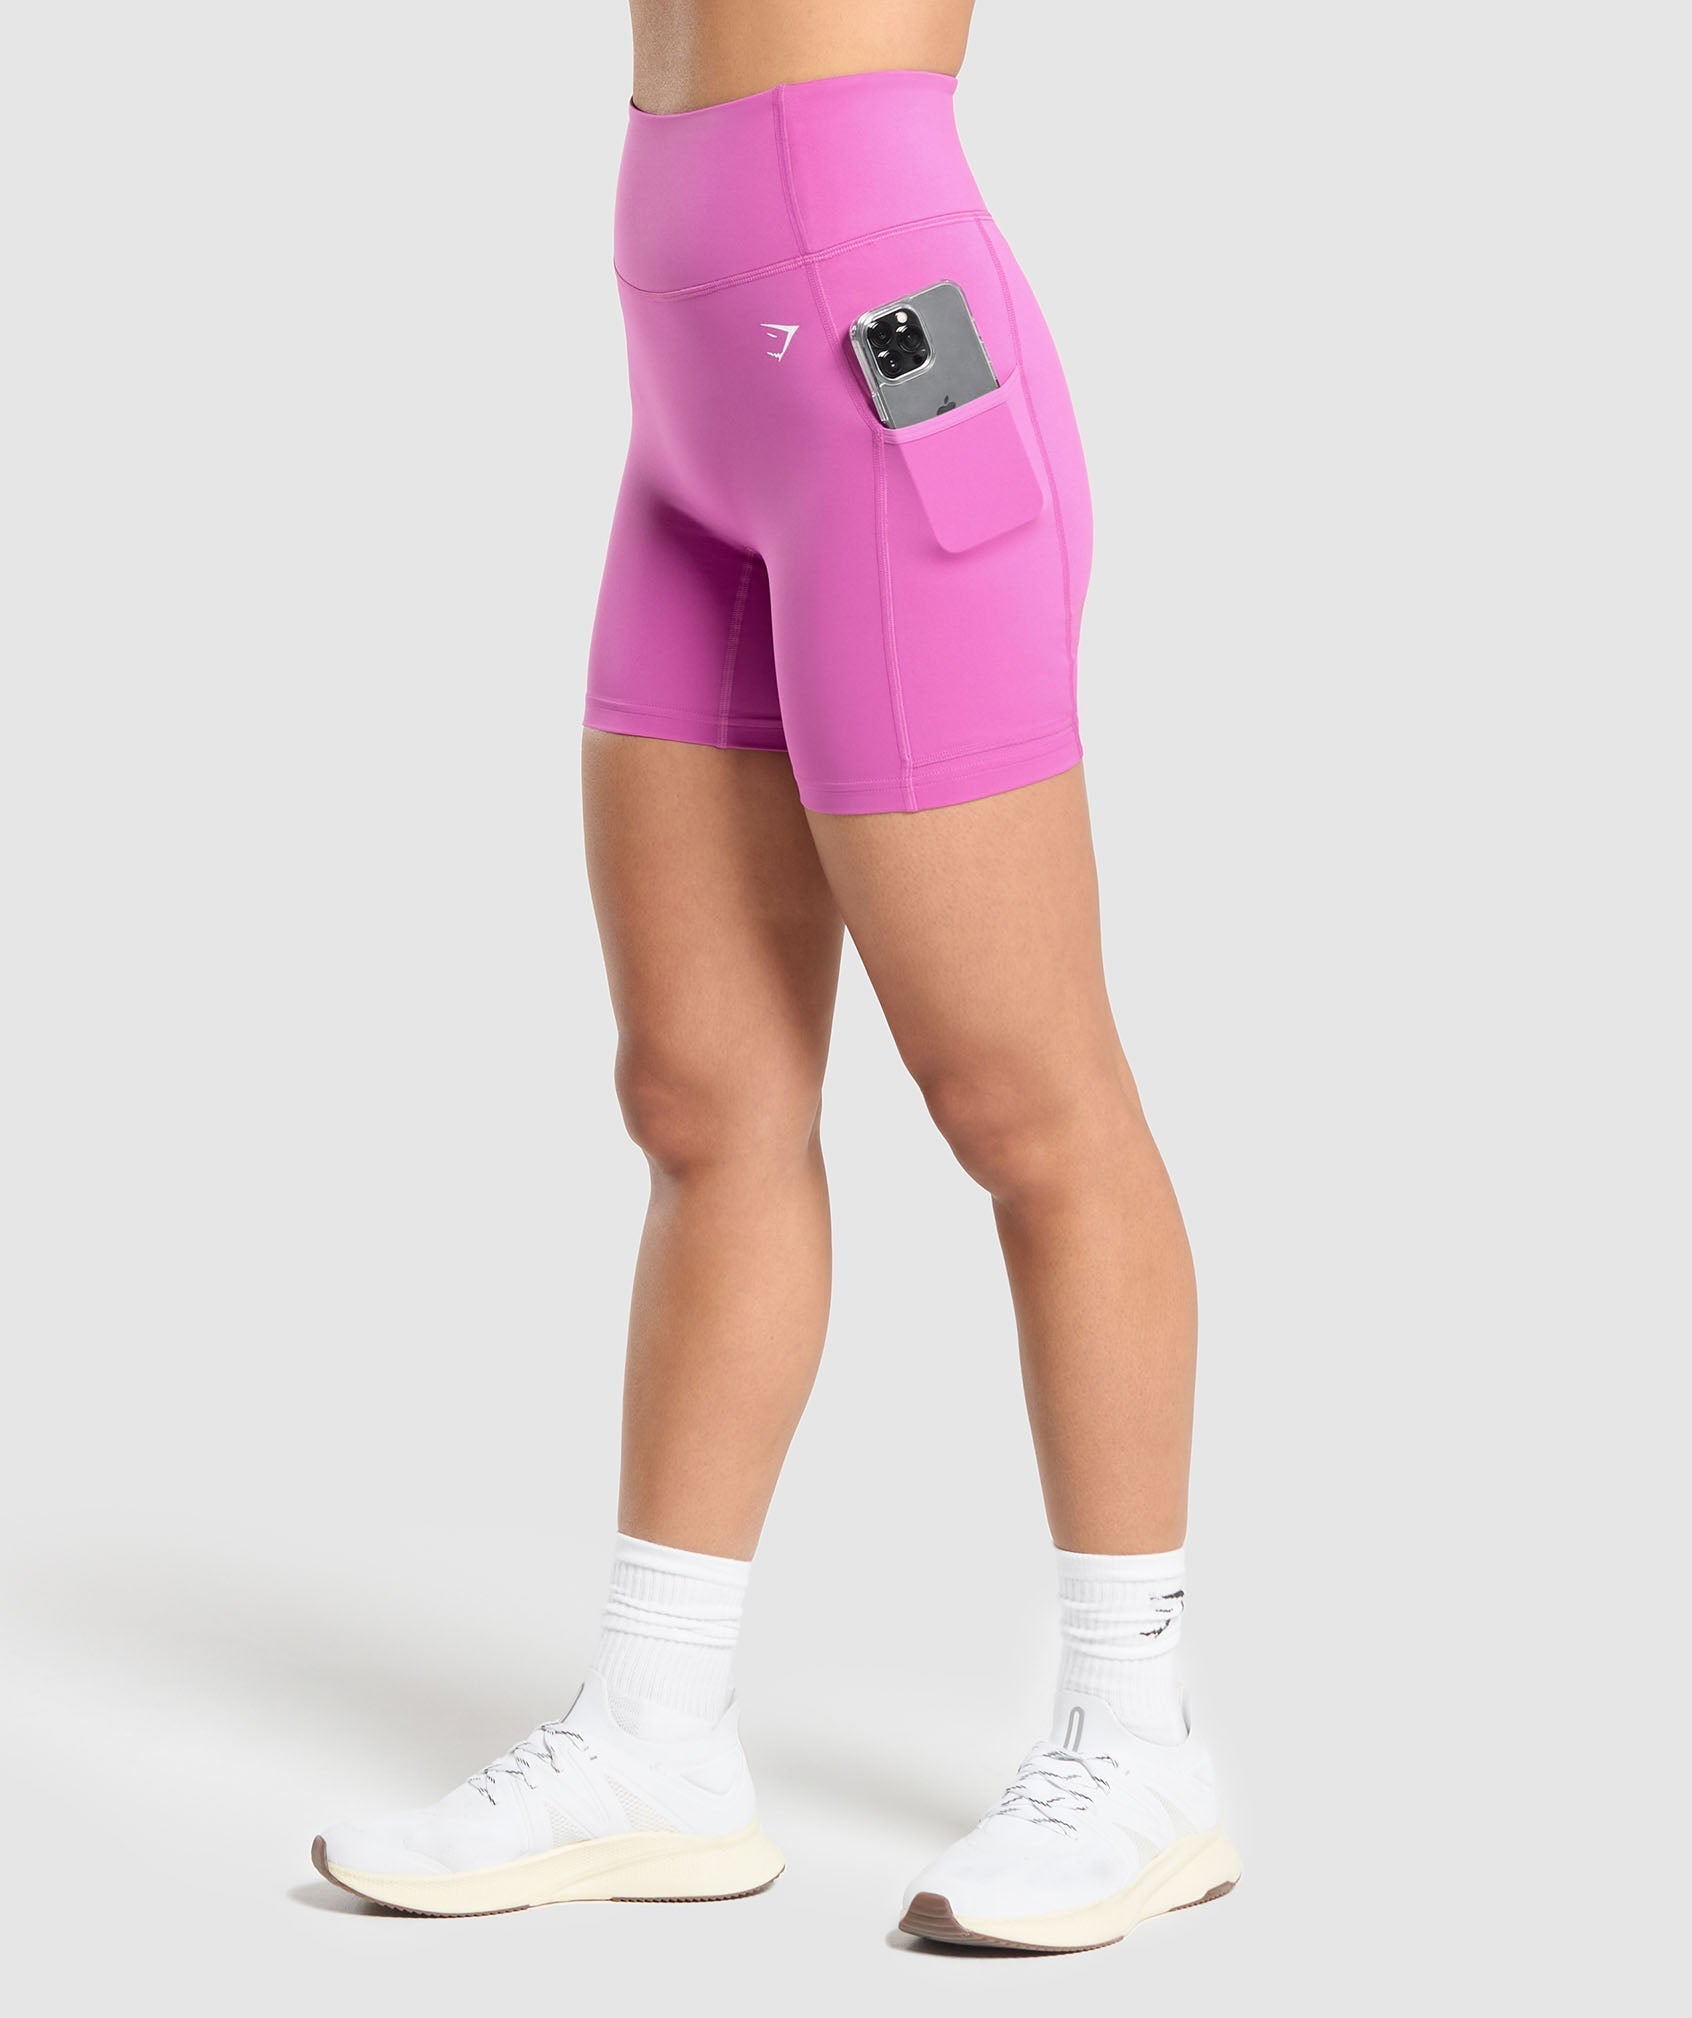 Pocket Shorts in Shelly Pink